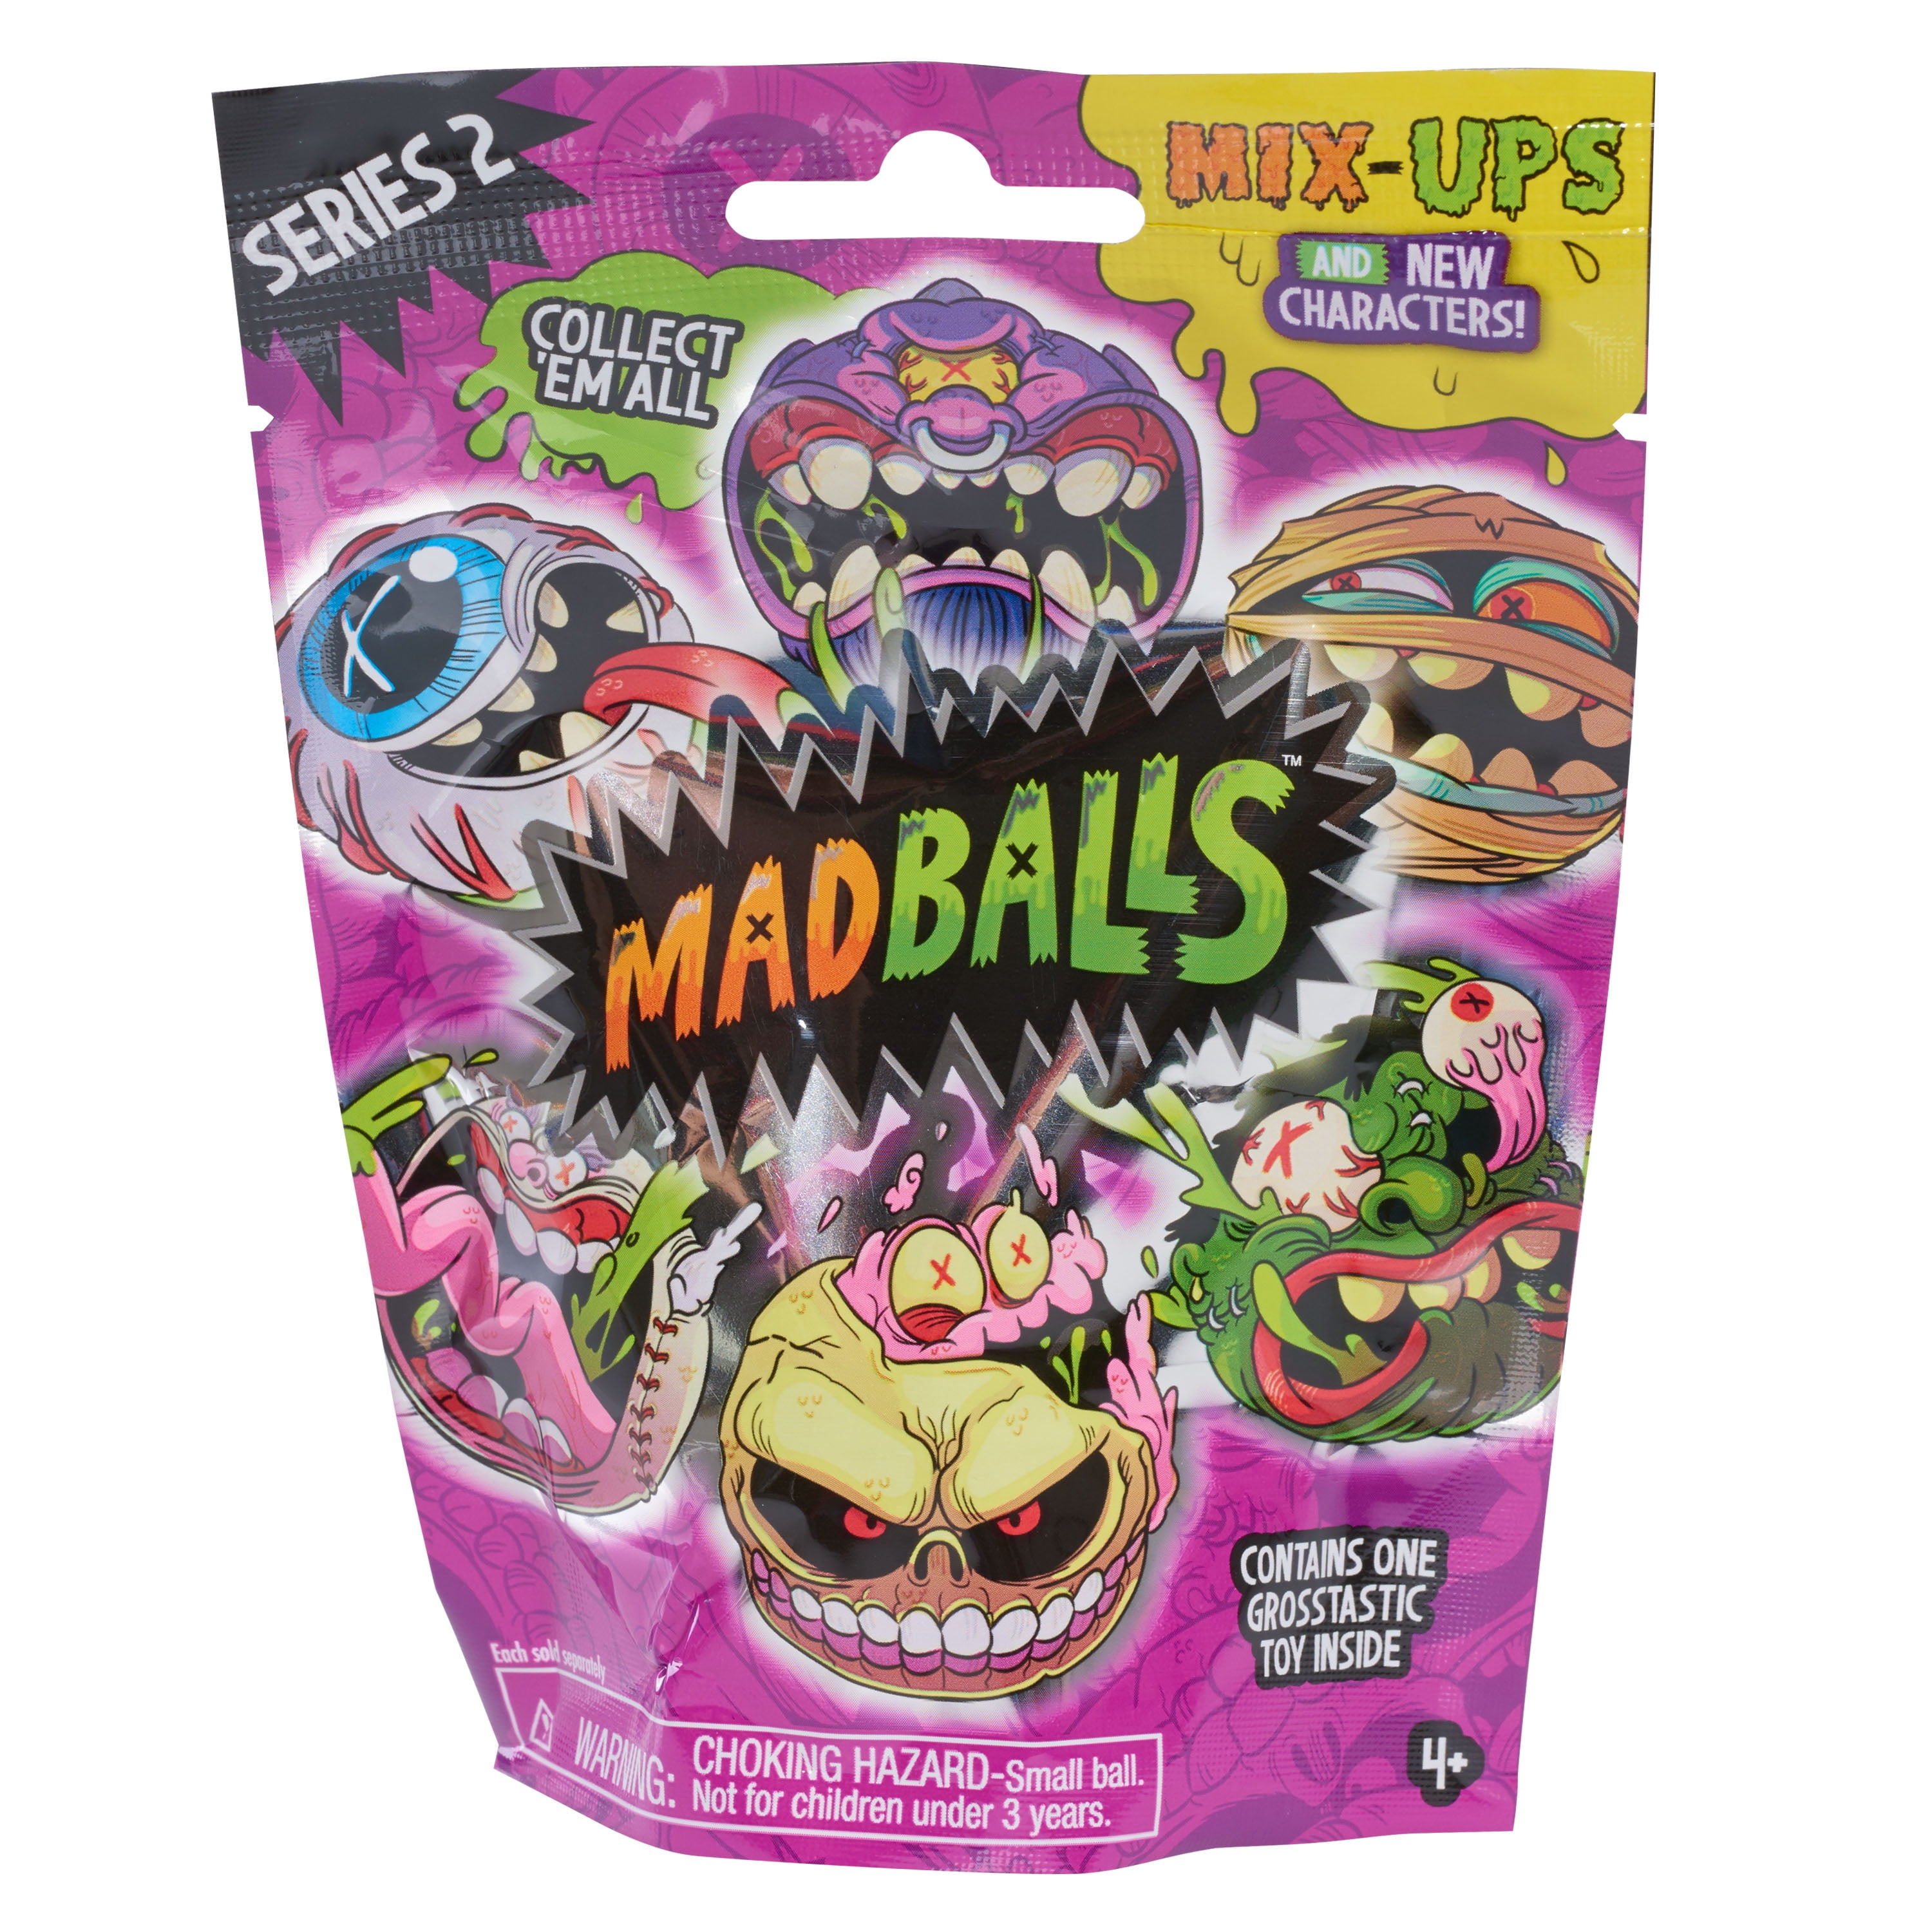 MADBALLS NEW & SEALED 2017 SERIES 2 MYSTERY BLIND PACK GROSSTASTIC TOYS MIX-UPS 